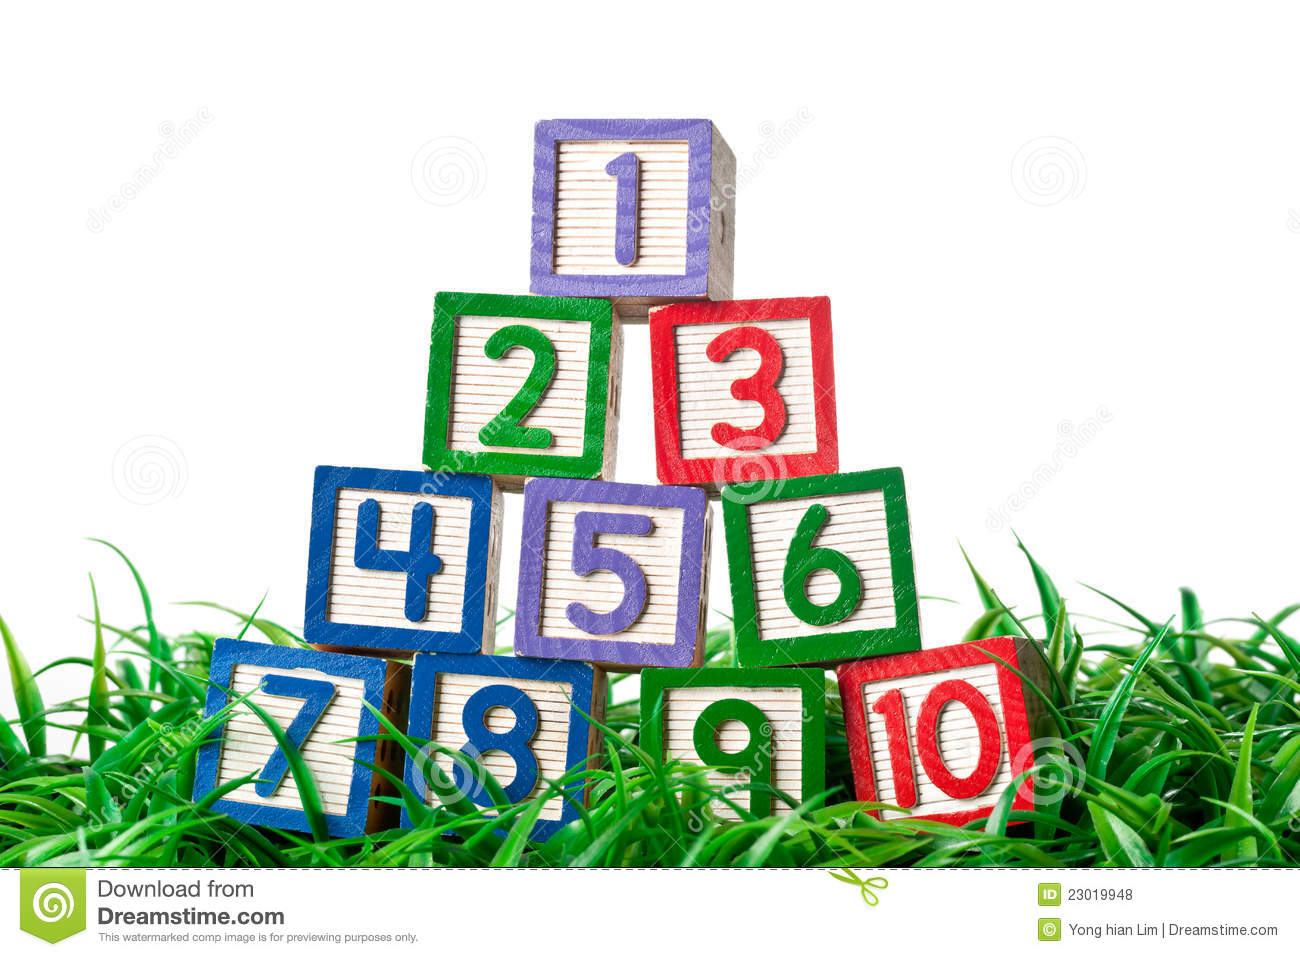 Number Blocks Stacked On Grass Royalty Free Stock Photos   Image